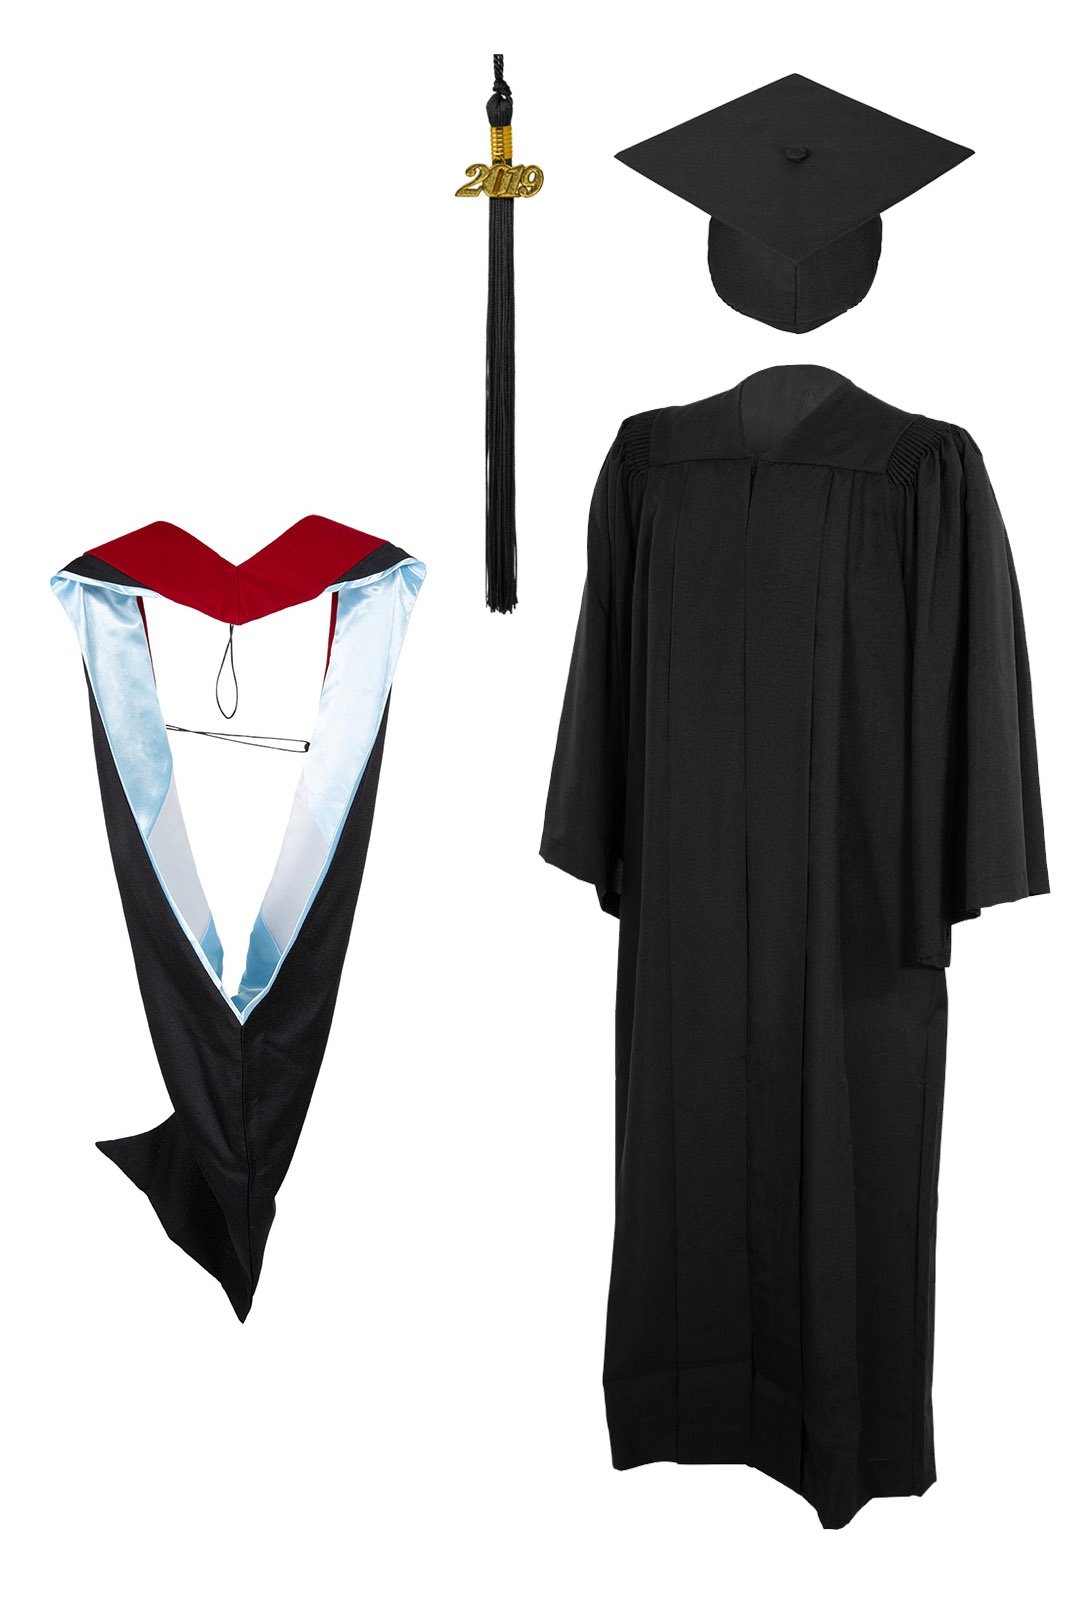 Bachelor Cap and Gown Set | University Cap and Gown Set